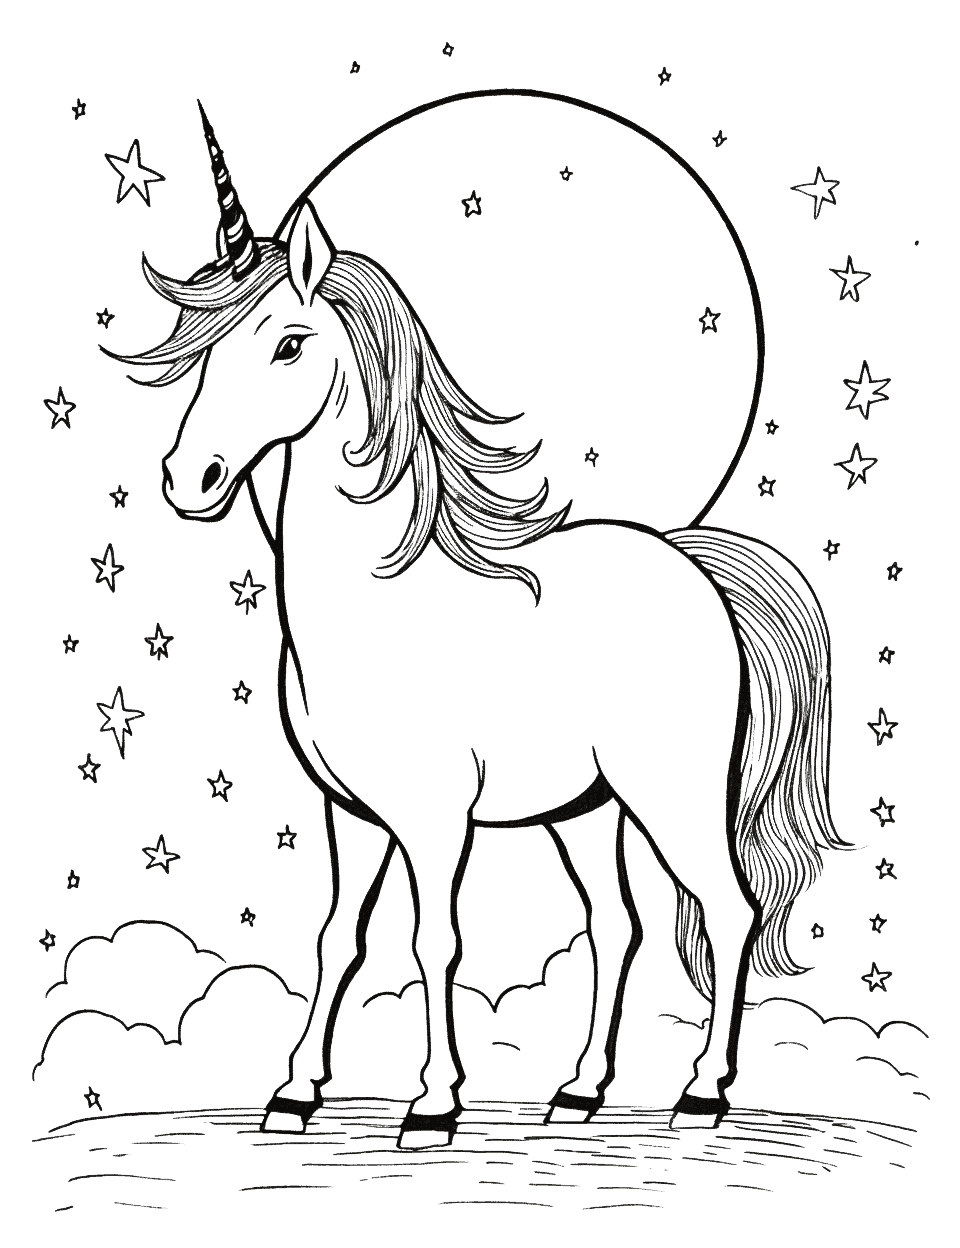 Unicorn in the Moonlight Coloring Page - A mystical unicorn standing under the moonlight, surrounded by sparkling stars.